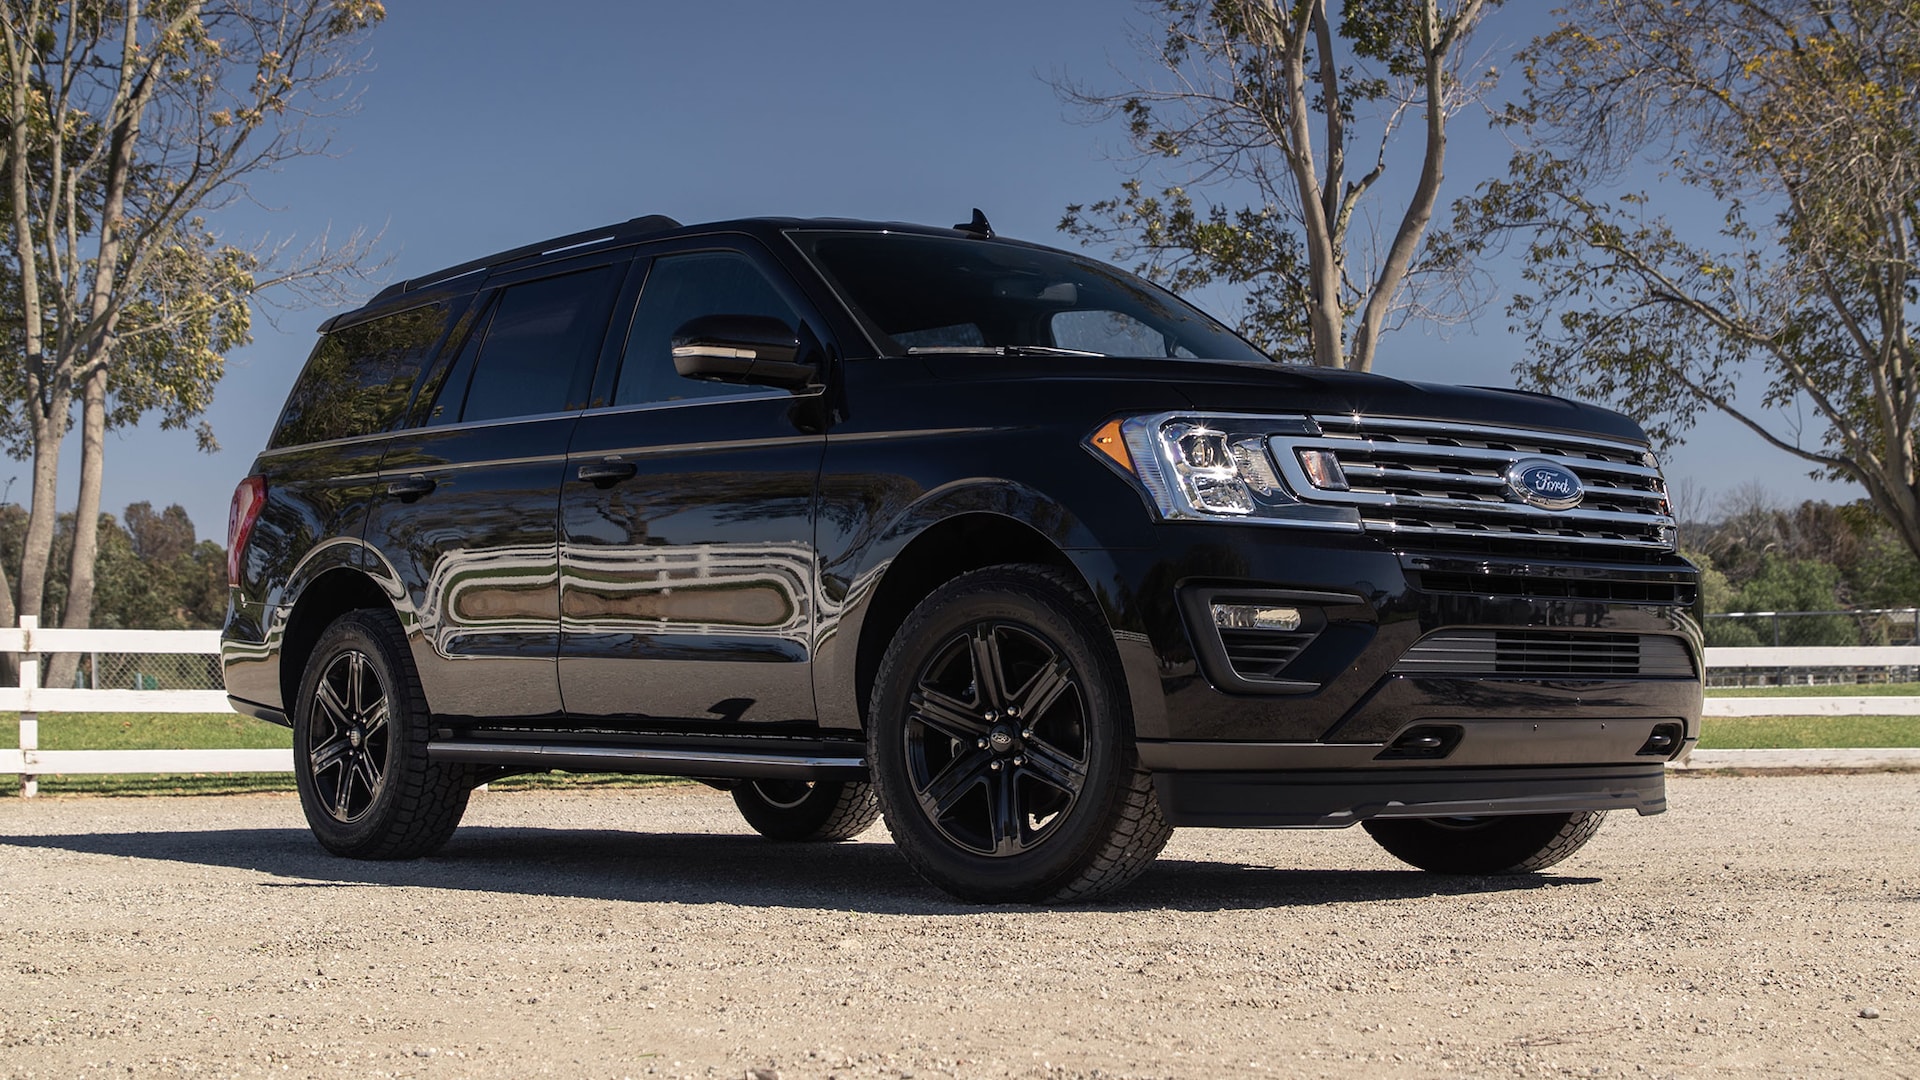 2020 Ford Expedition Review: One Week With Ford's Full-Size SUV